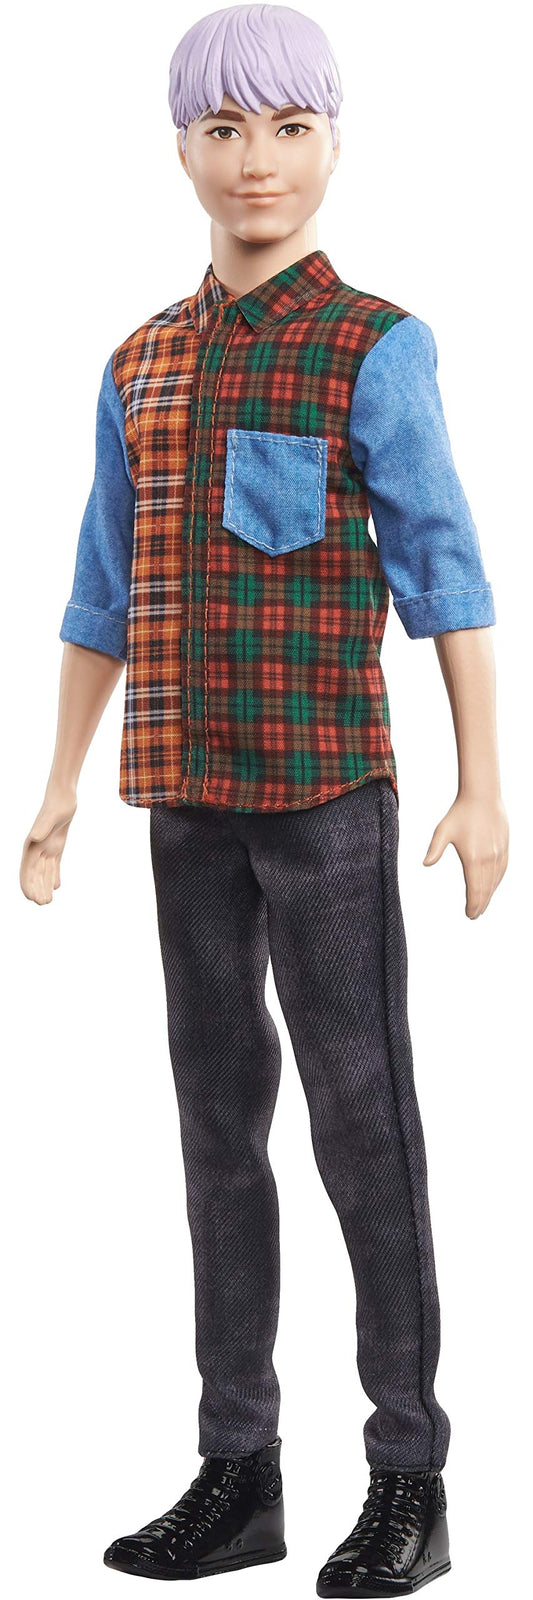 Barbie Ken Fashionistas Doll #154 with Sculpted Purple Hair Wearing a Color-Blocked Plaid Shirt, Black Denim Pants & Boots, Toy for Kids 3 to 8 Years Old